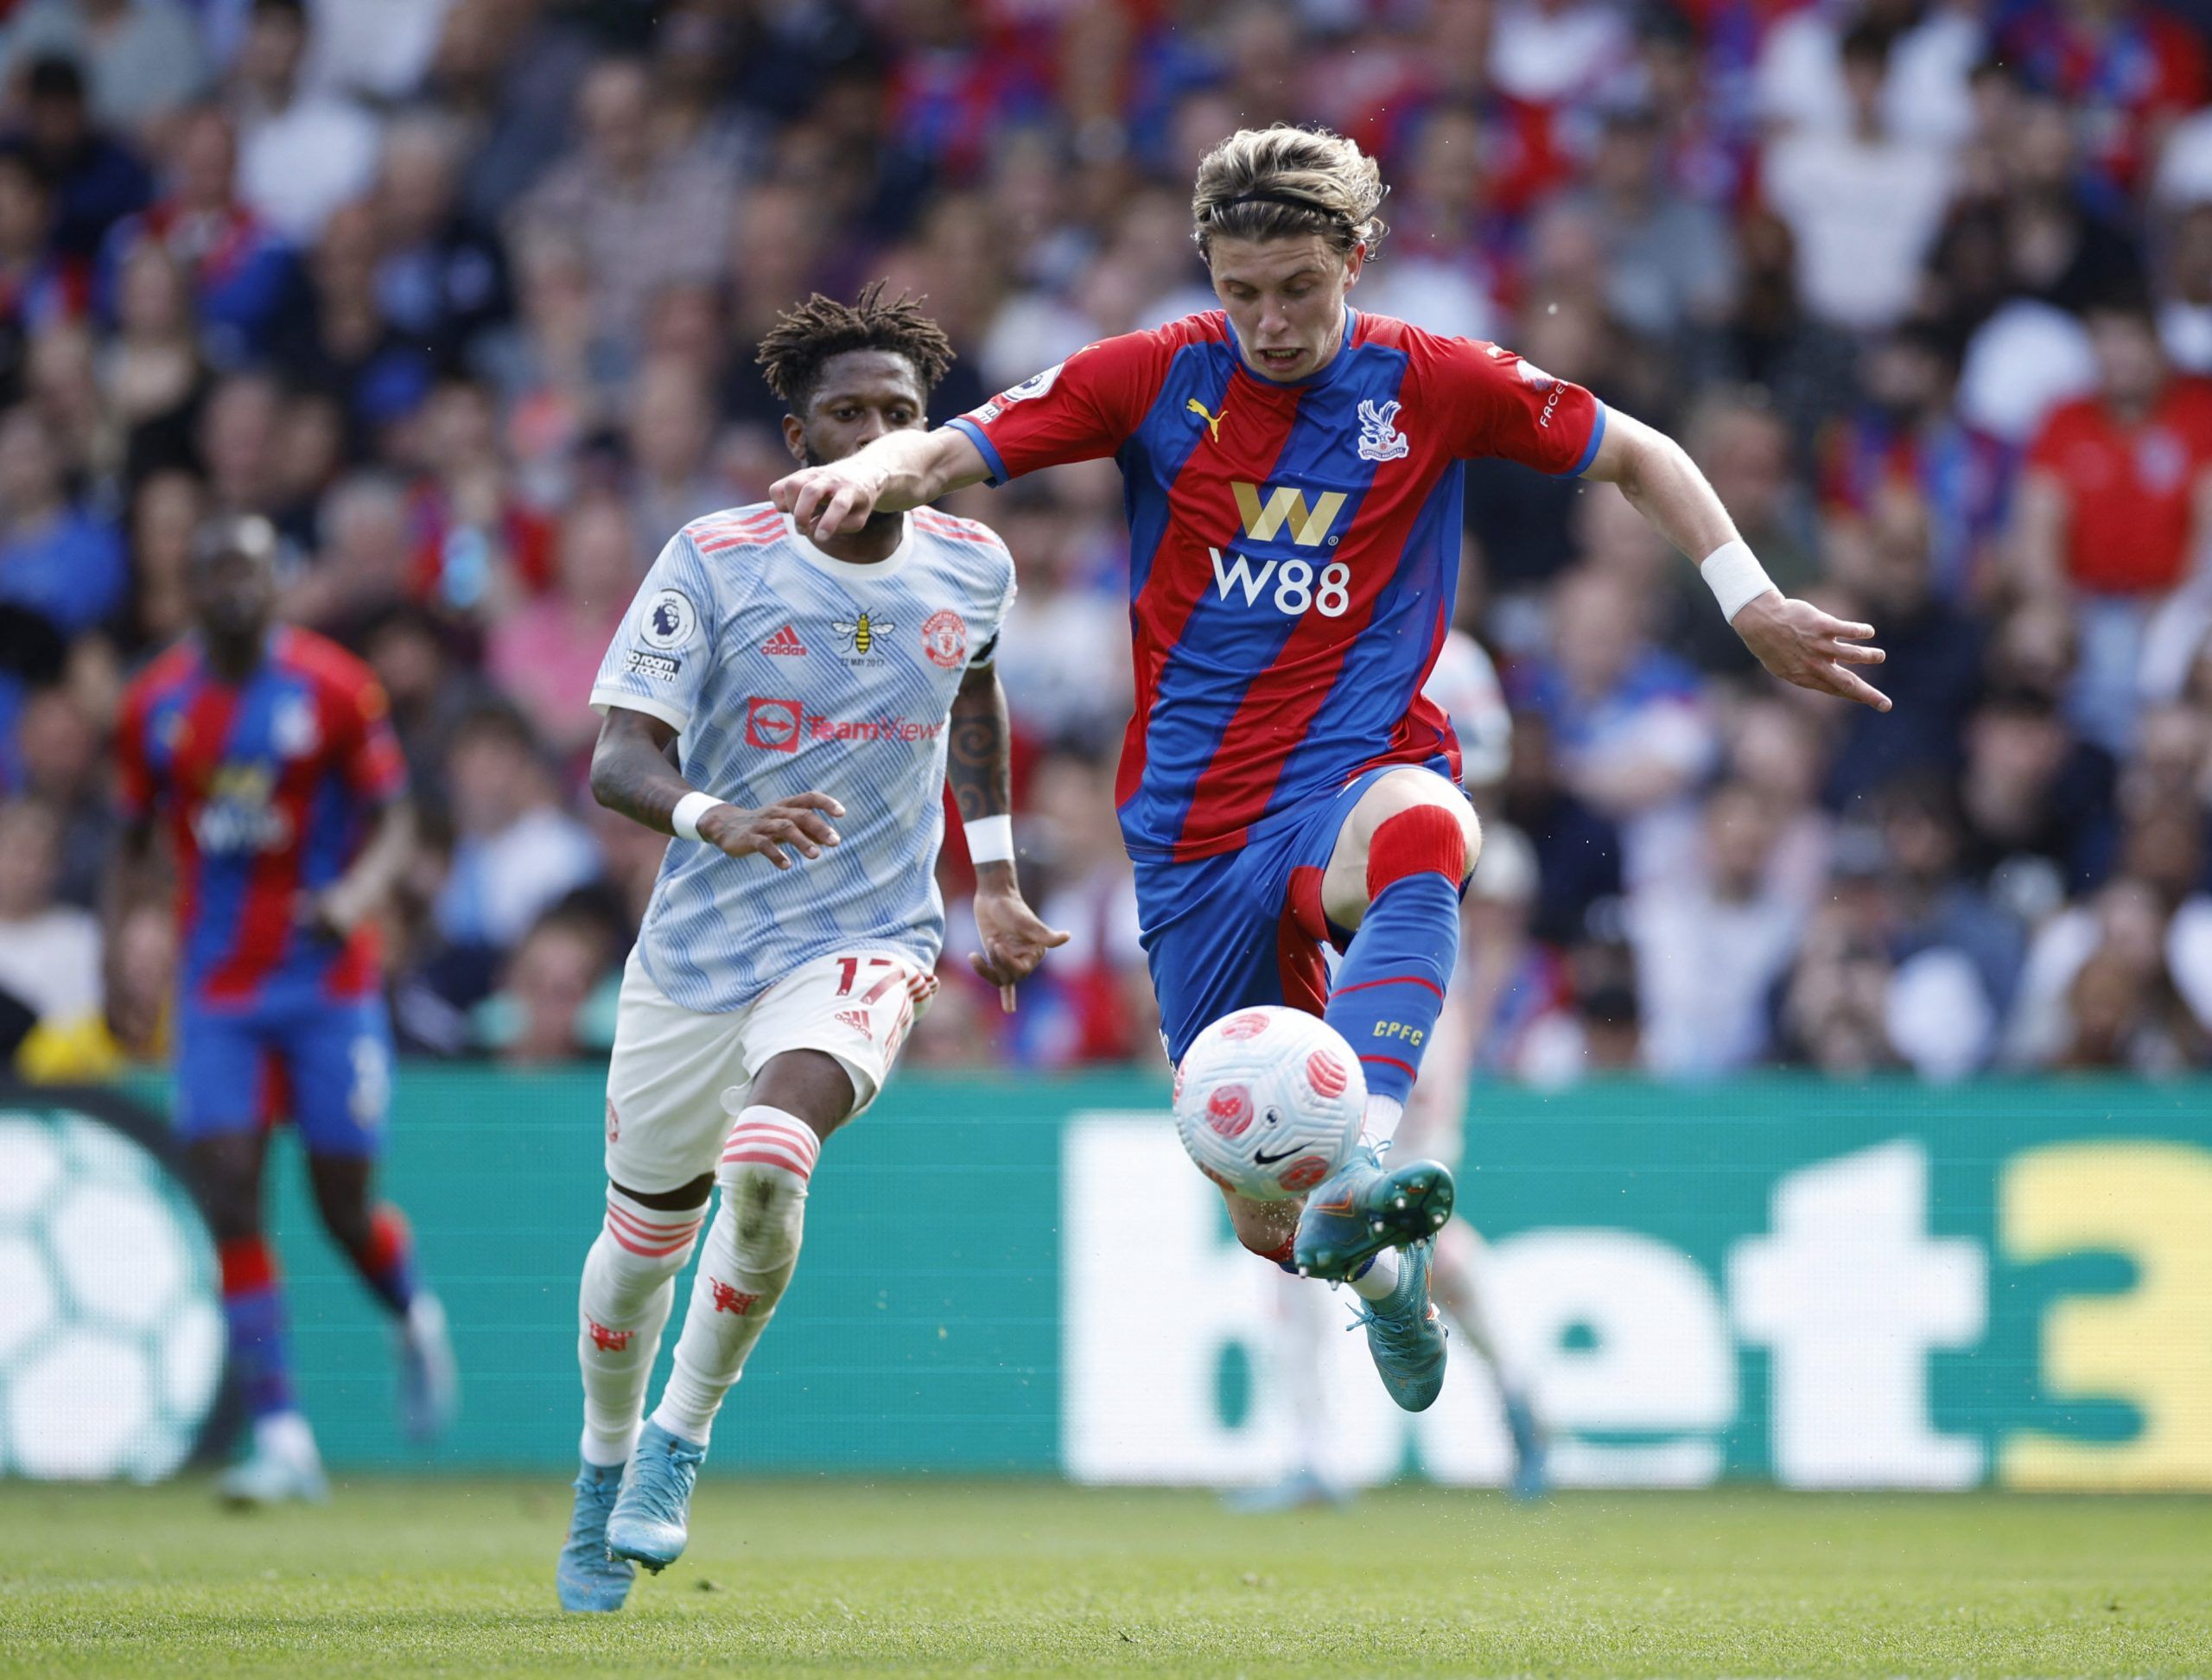 Premier League, Crystal Palace, Conor Gallagher, CPFC, CPFC news, Palace news, CPFC opinion, Crystal Palace latest news